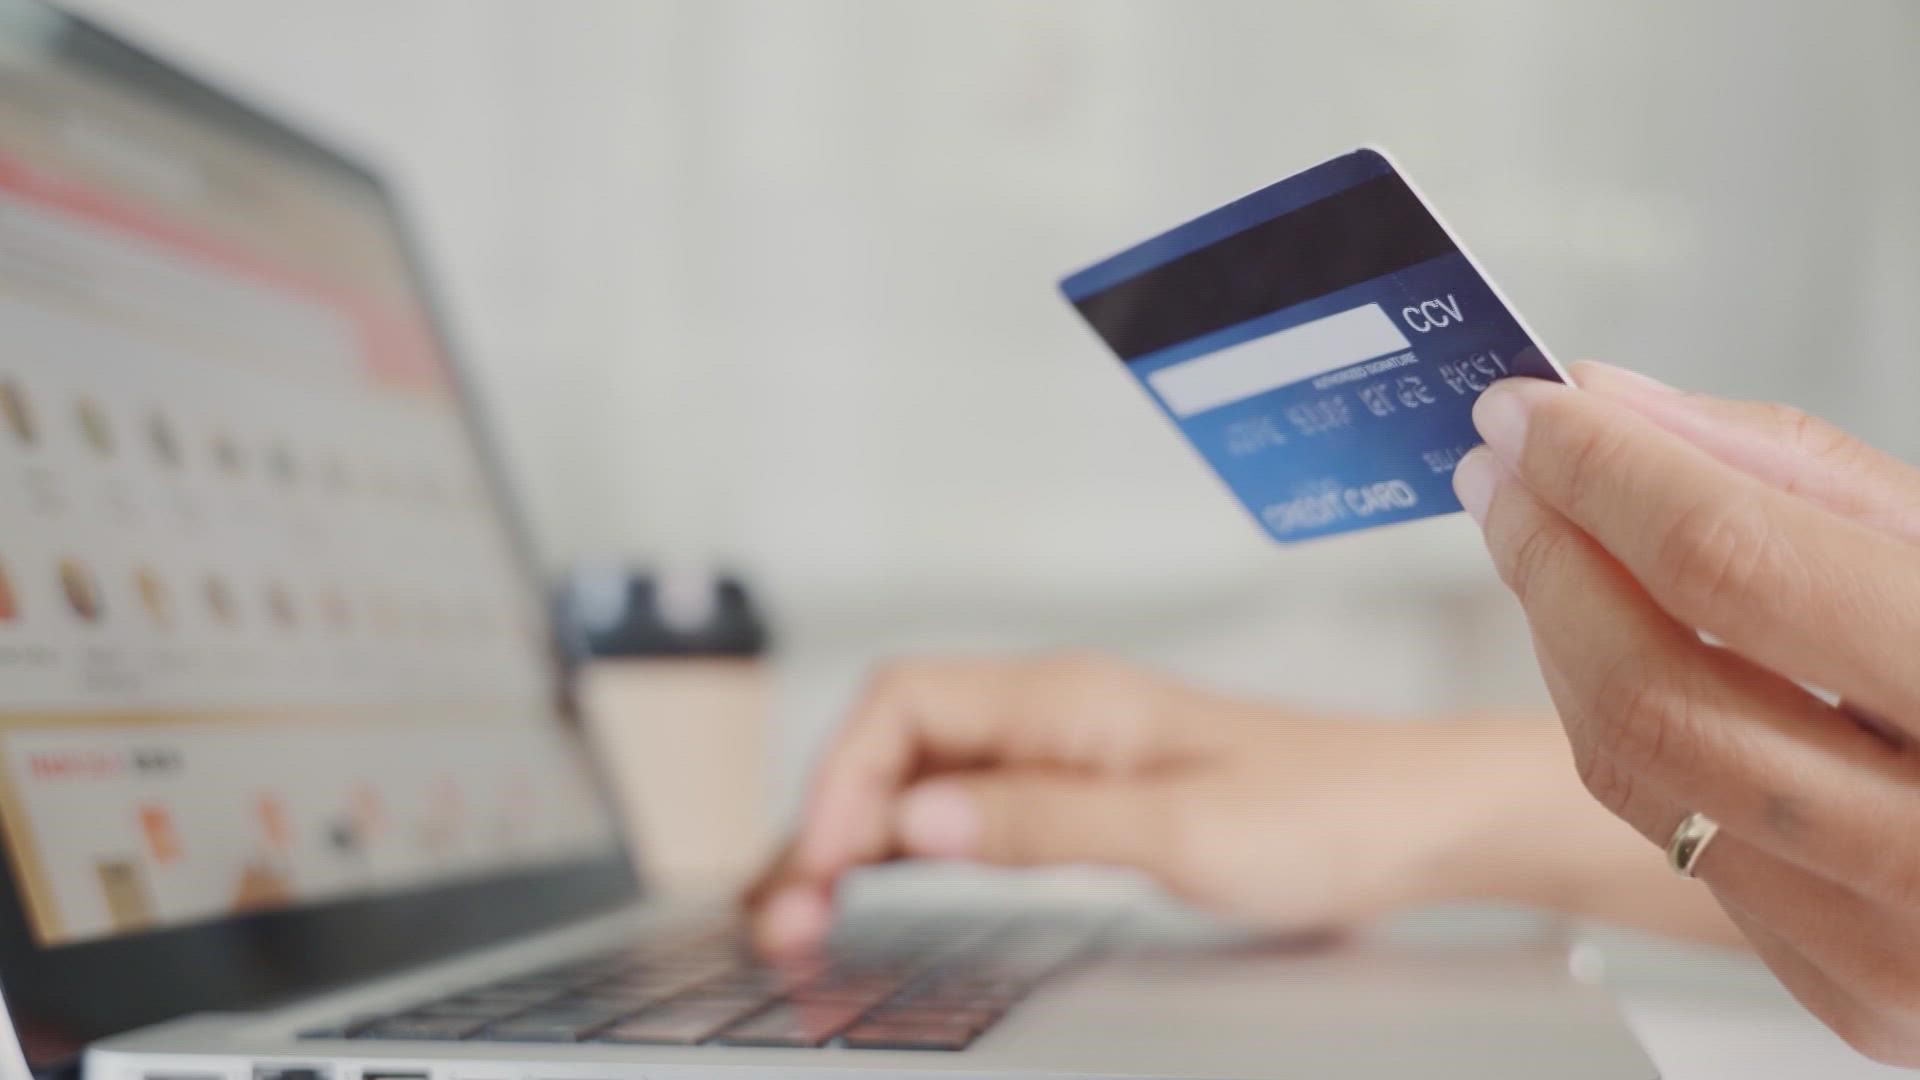 Whether shopping in person or online, keep yourself, your information, and your money safe.